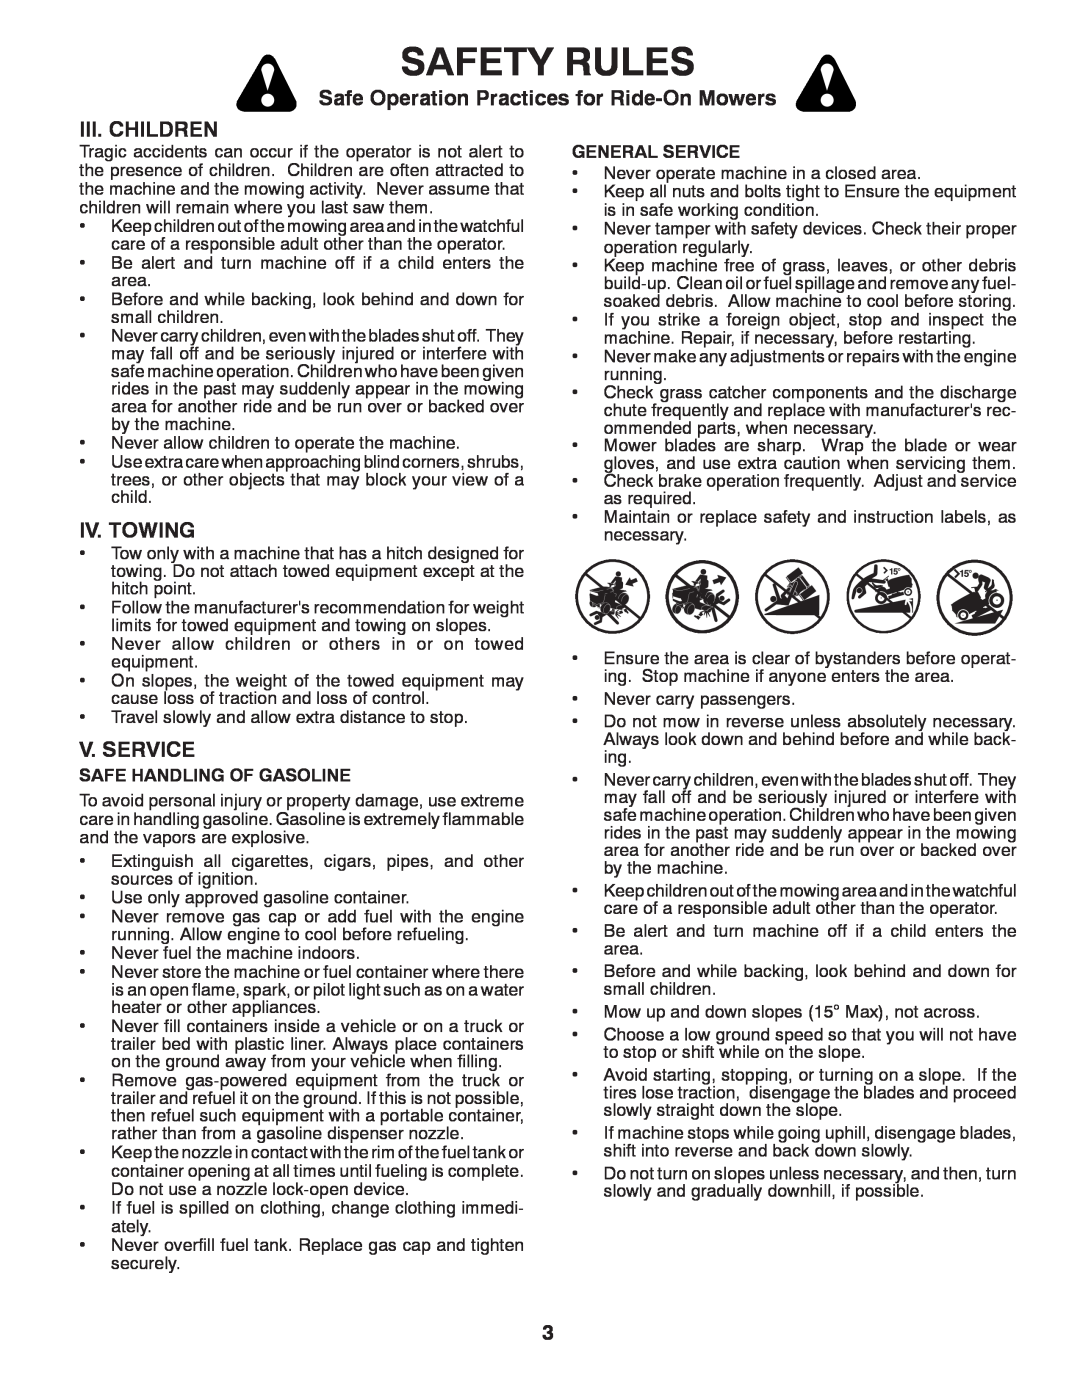 Poulan 532 43 88-17 manual Safety Rules, Safe Operation Practices for Ride-OnMowers, Iii. Children, Iv. Towing, V. Service 